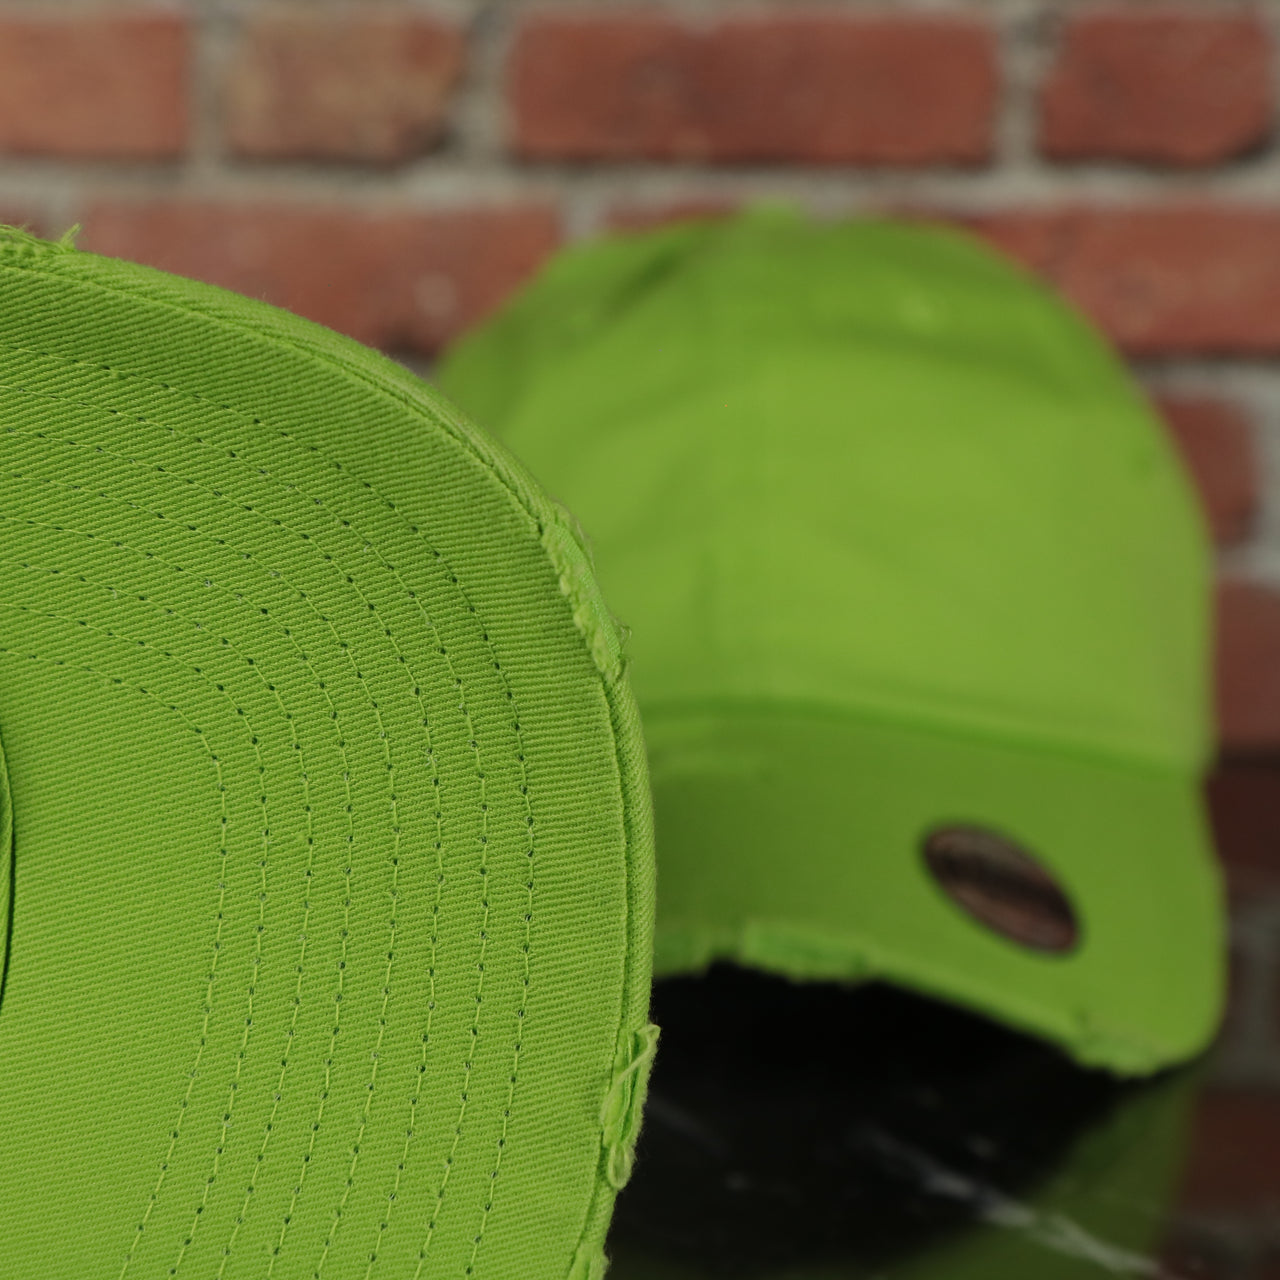 Lime Blank Distressed Dad Hat